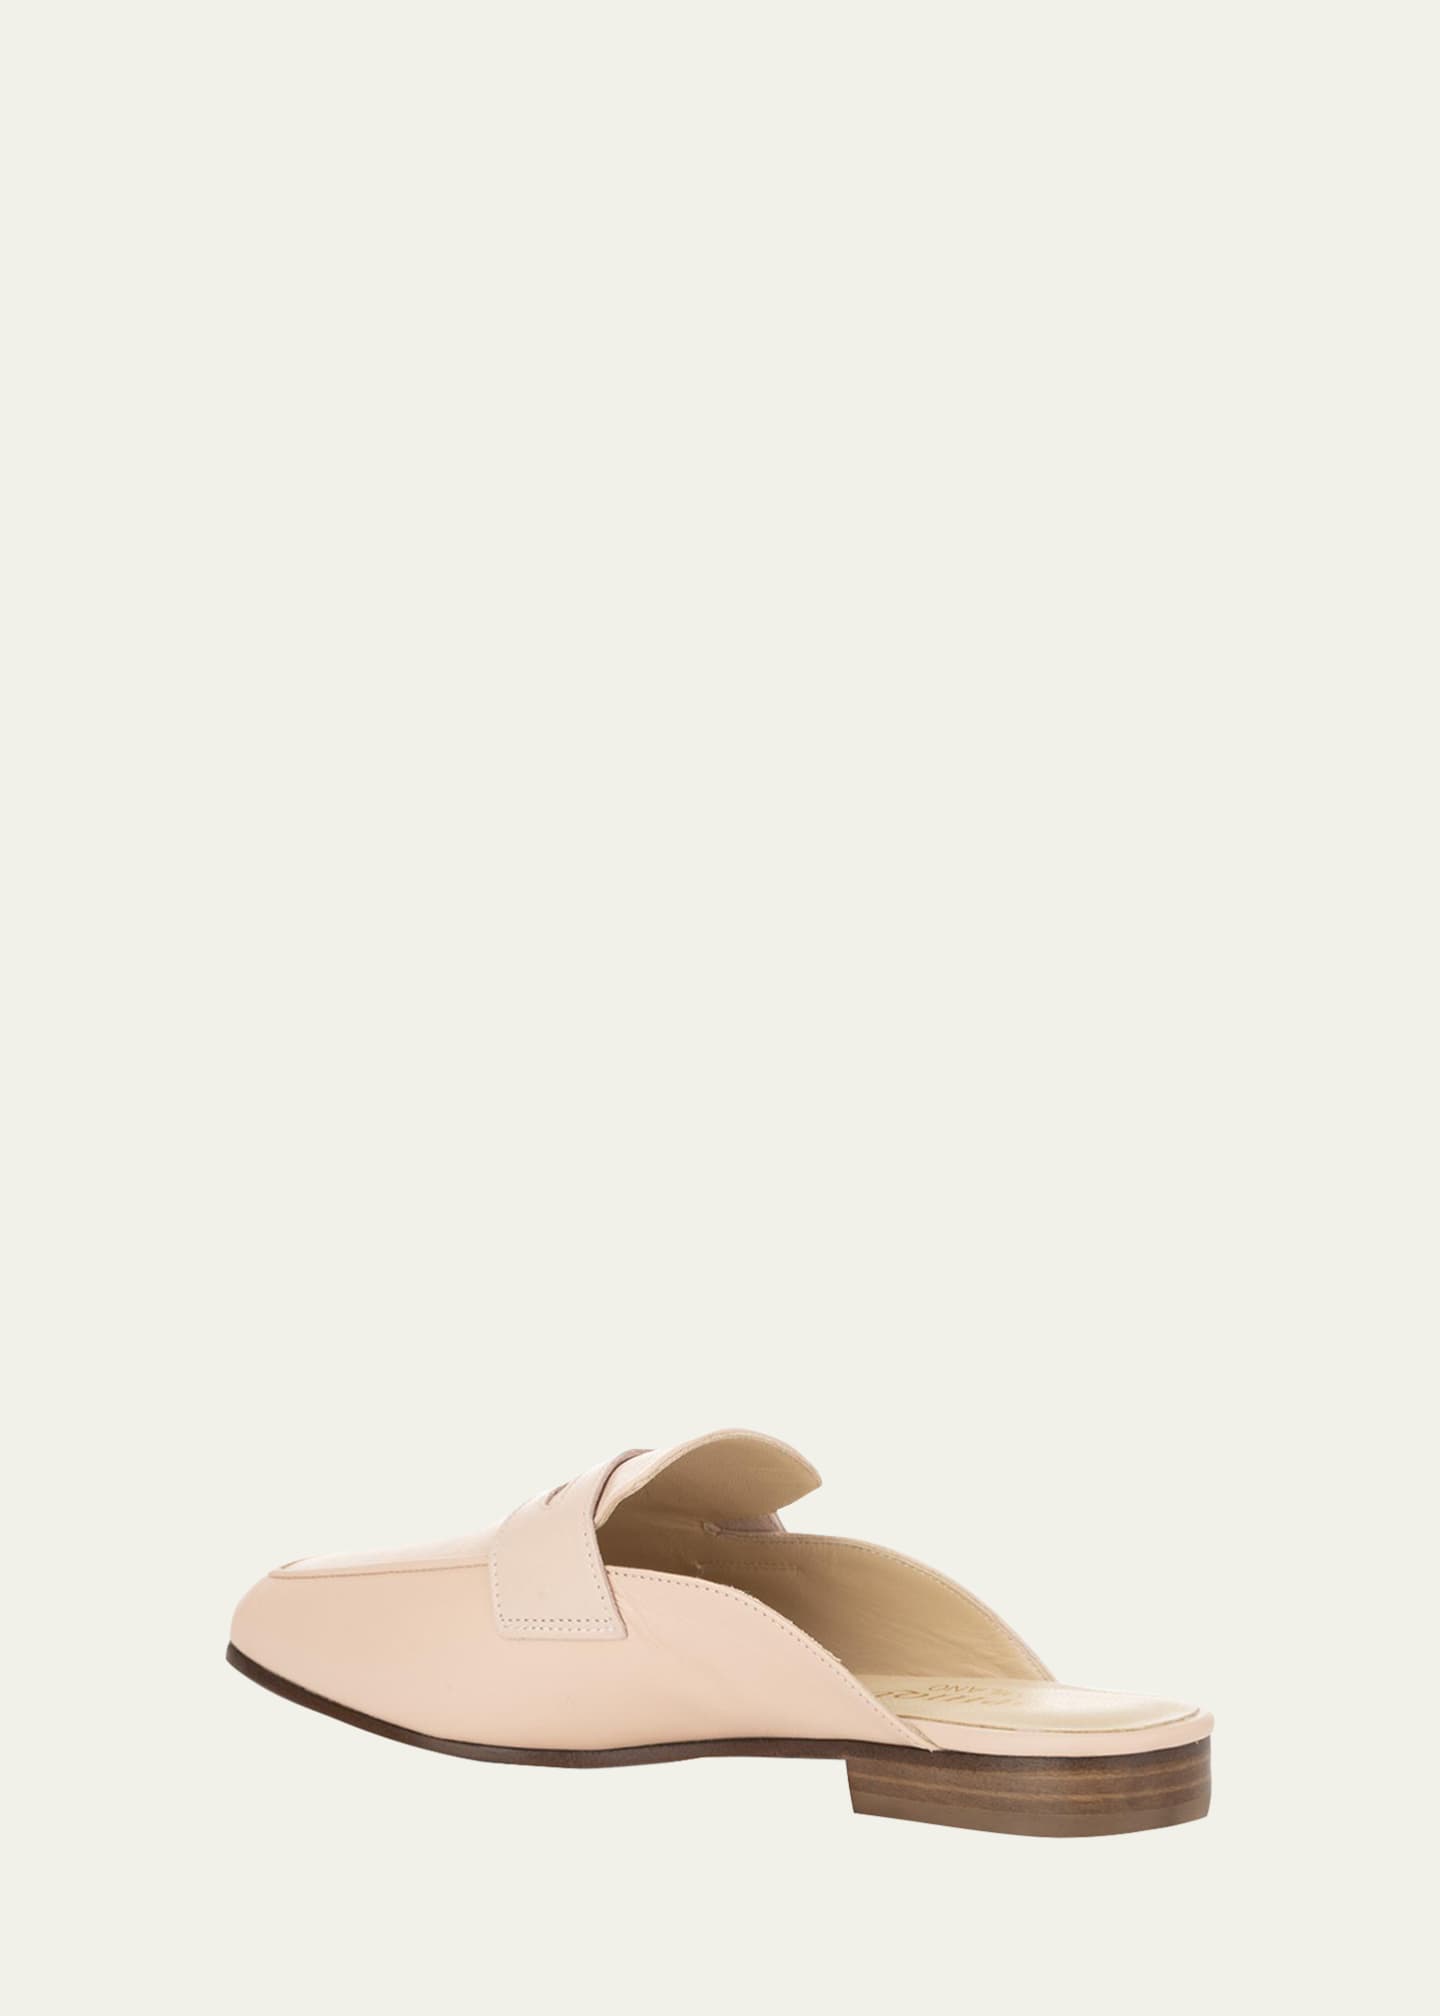 Sophique Riviera Leather Penny Loafer Mules - Bergdorf Goodman